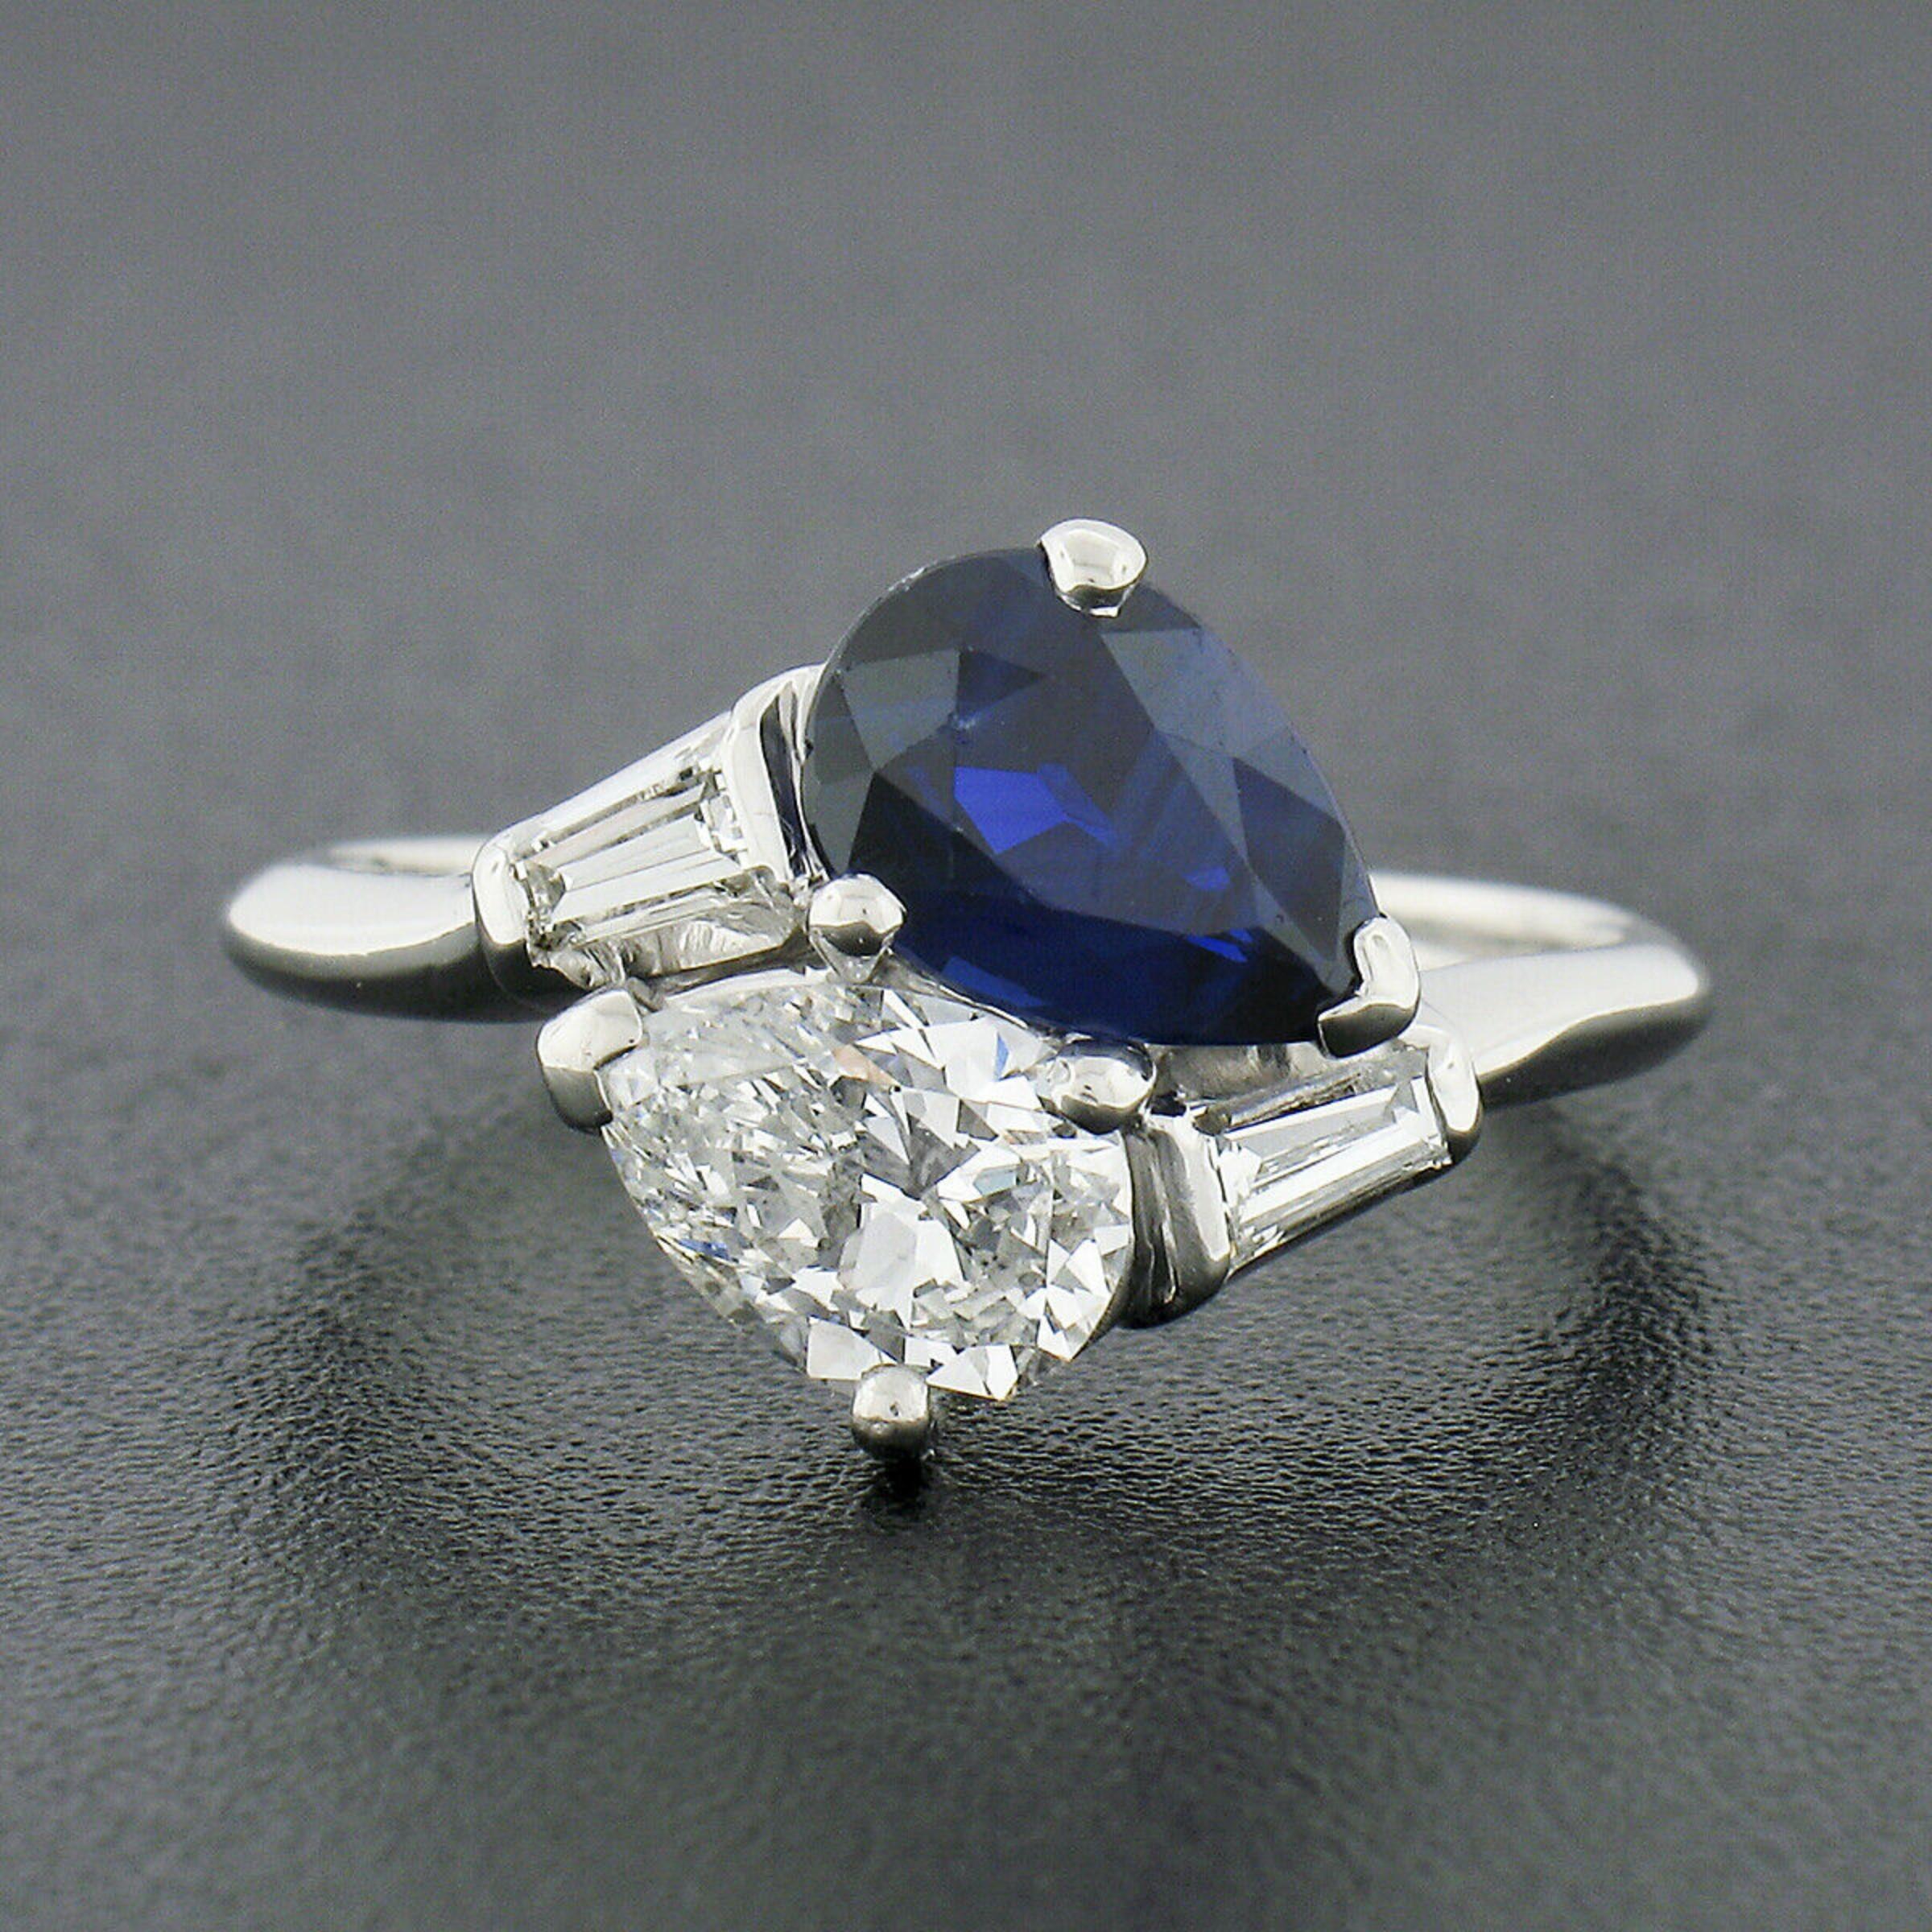 This vintage, Maurice Tishman, bypass ring is very well crafted in solid platinum and features a GIA certified pear cut sapphire neatly prong set at one end of the bypass design. The fine sapphire stands out with its rich royal blue color, while the